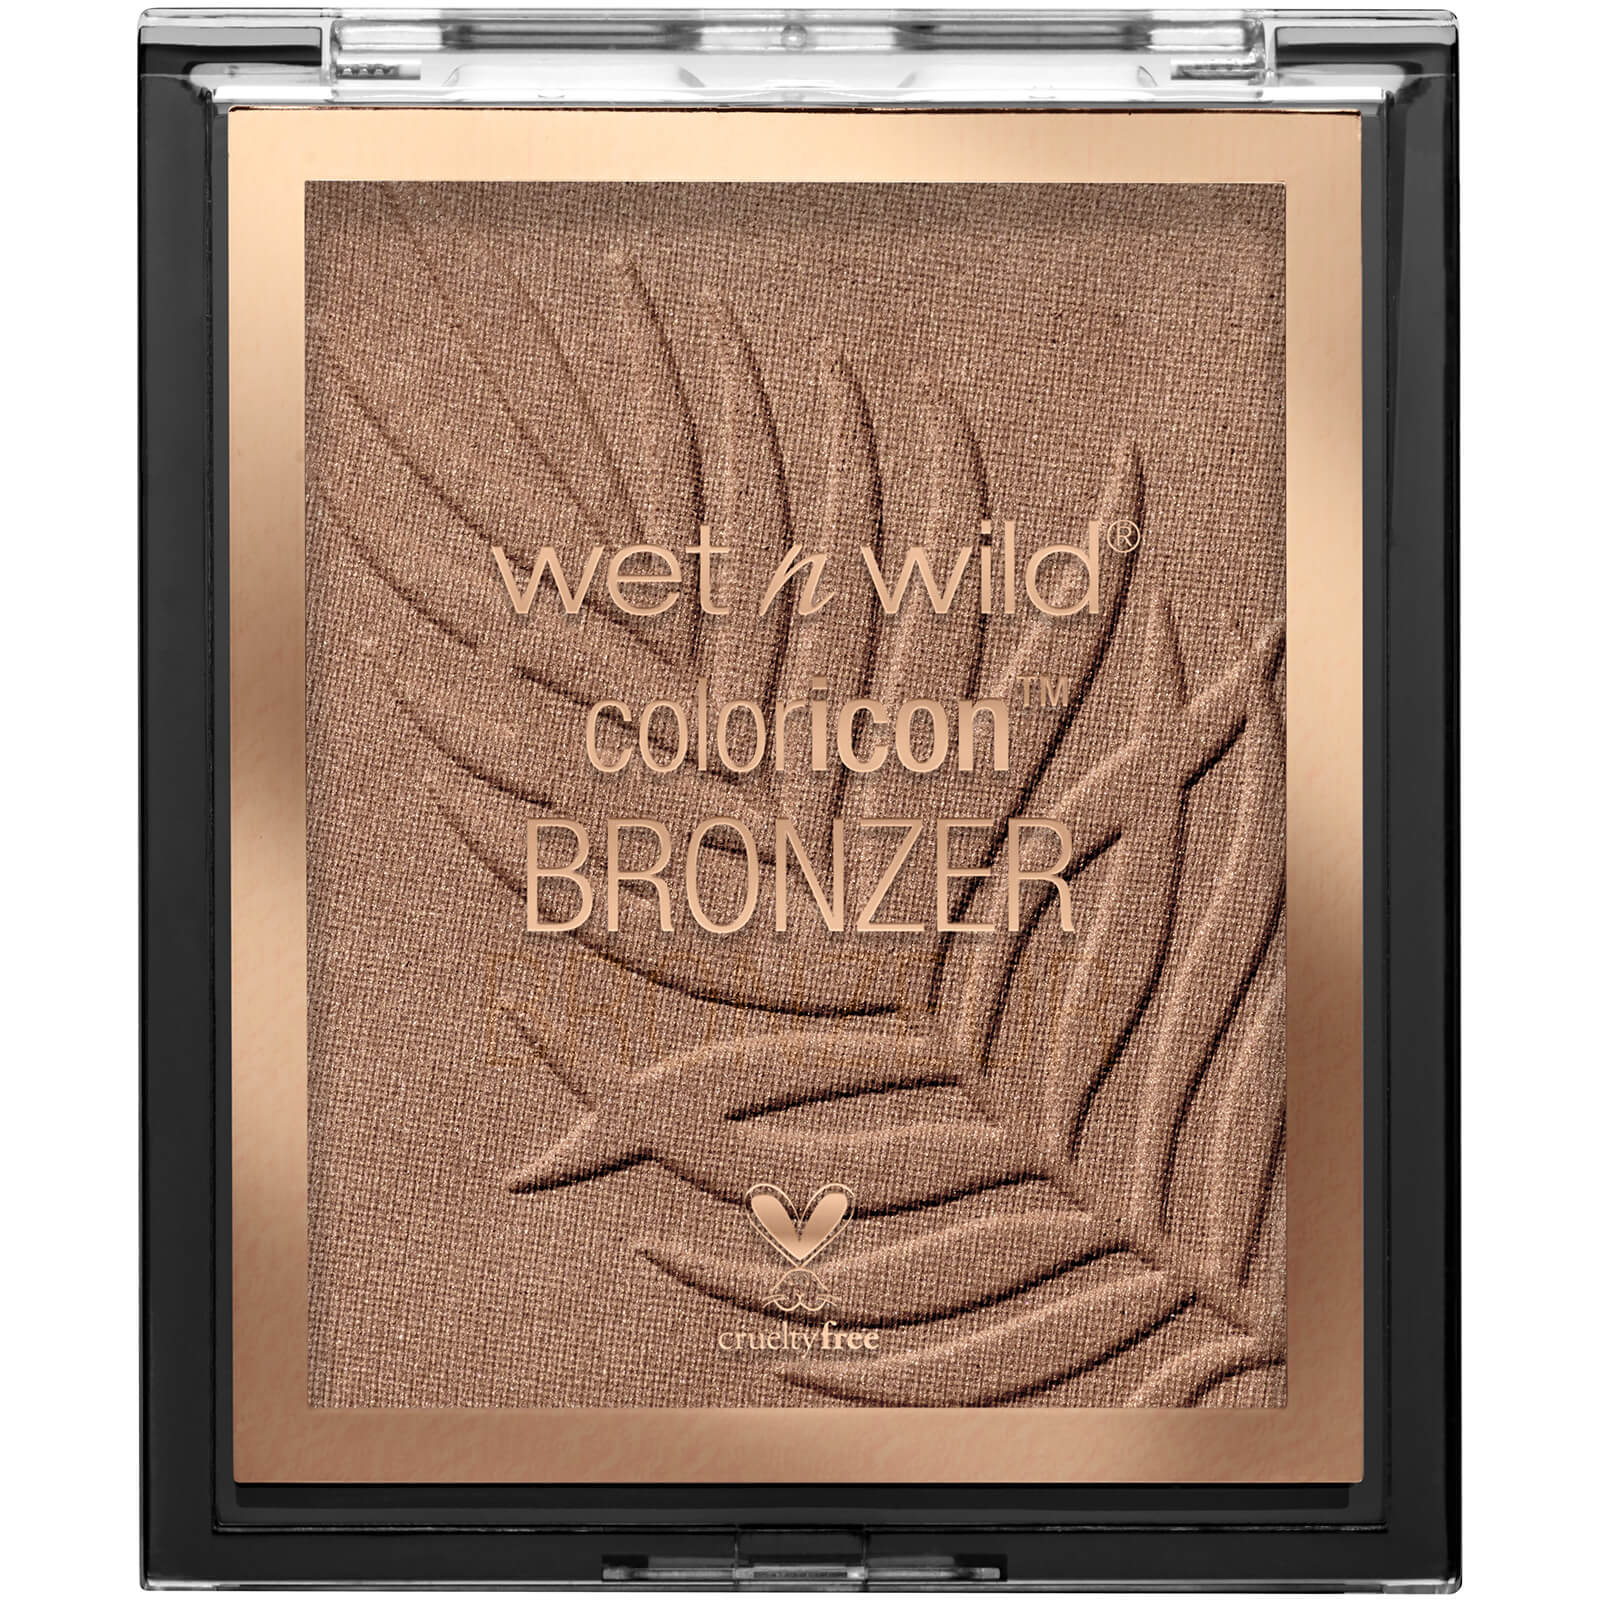 wet n wild coloricon Bronzer 11g (Various Shades) - Sunset Striptease